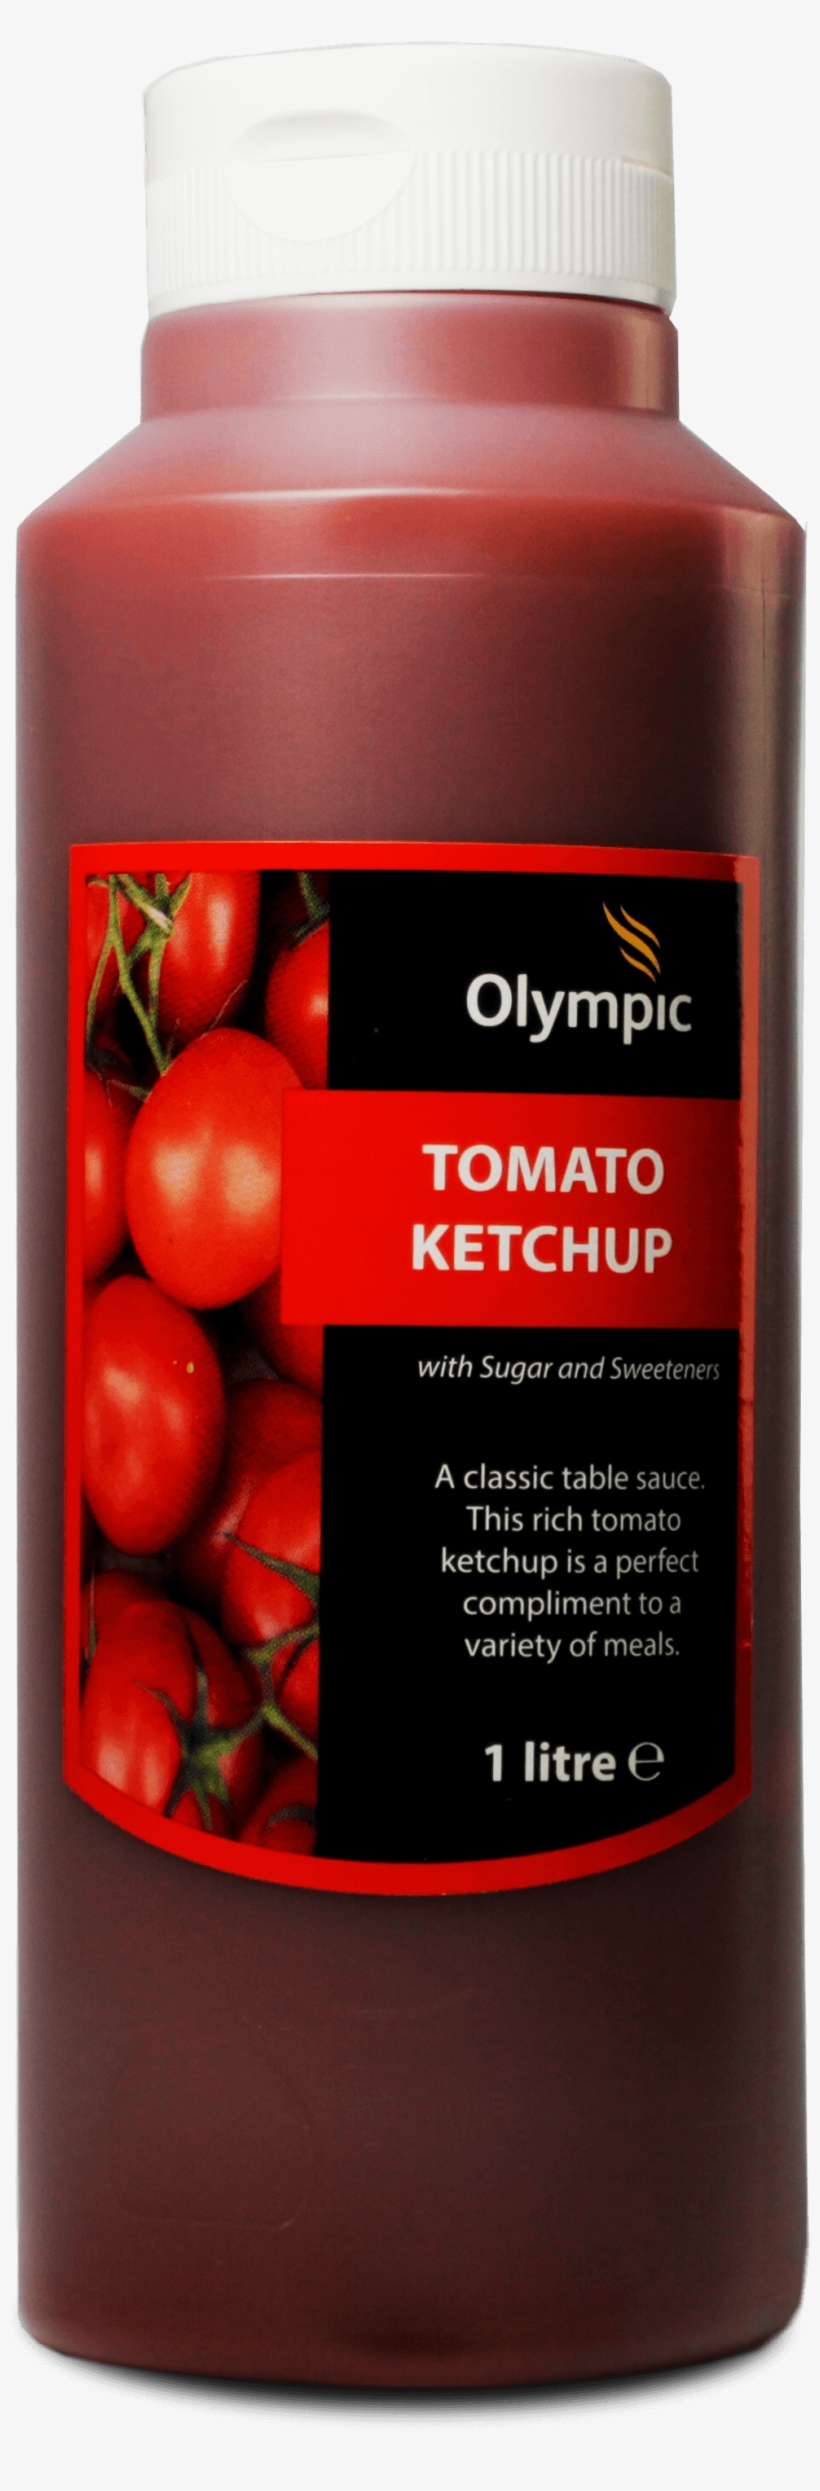 Olympic Tomato Ketchup 1l Bottle - Plum Tomato, transparent png #8385687